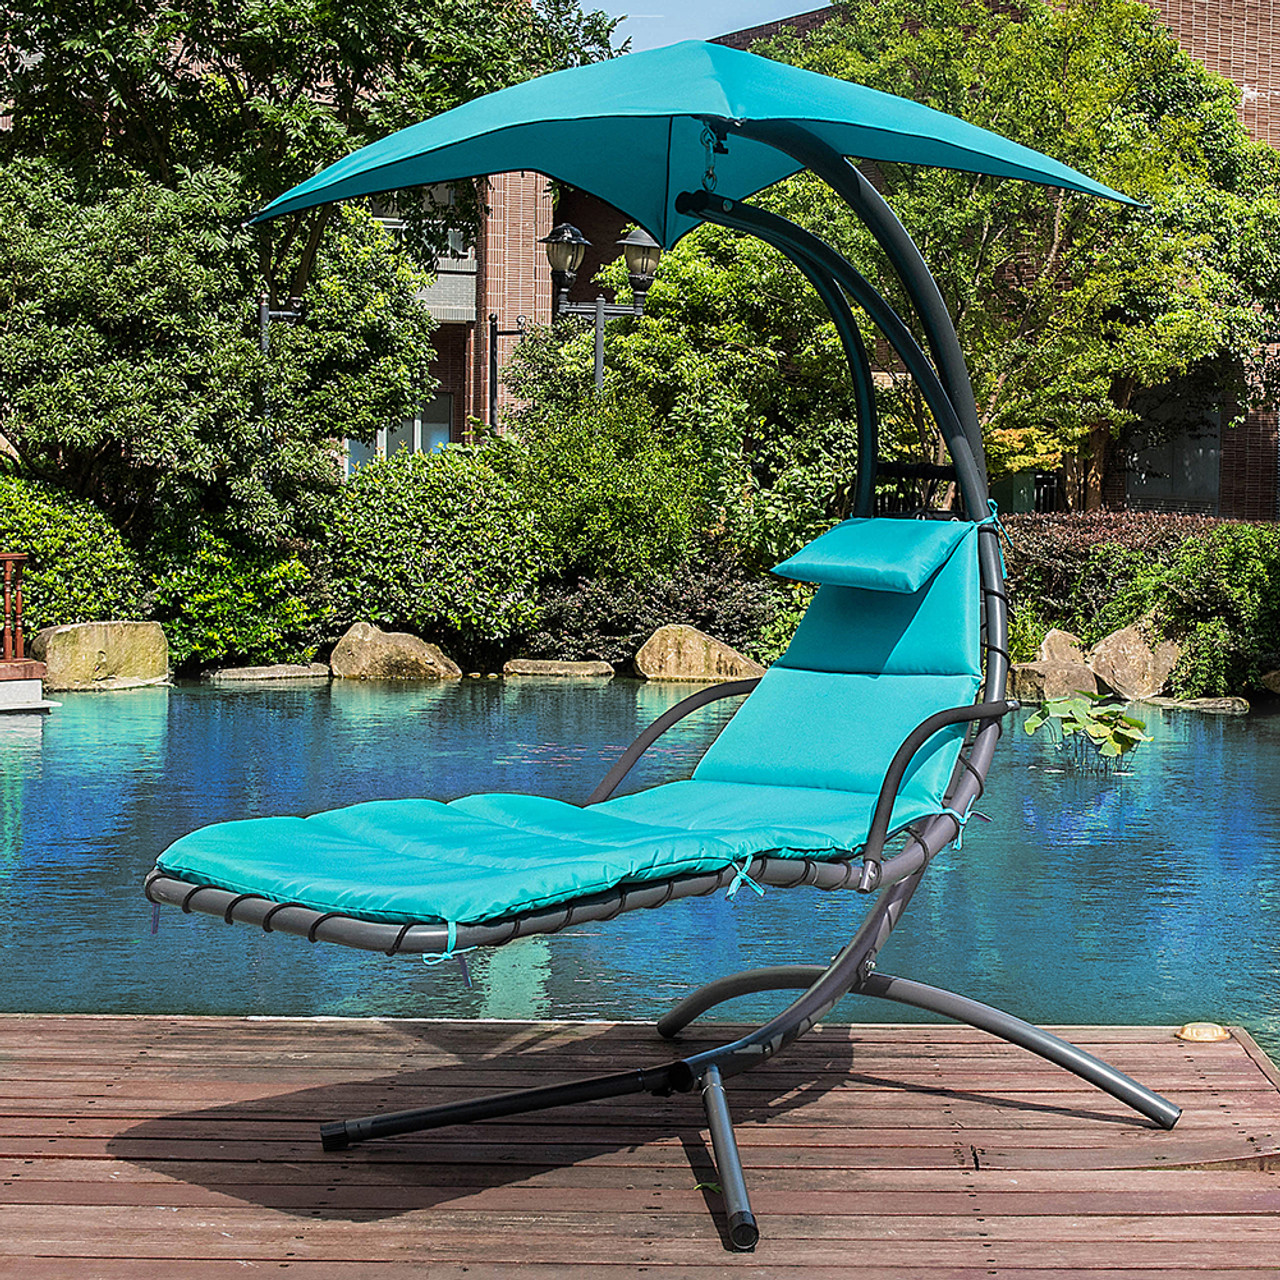 Lazy Daze Hammocks Dream Chair With Umbrella Hanging Chaise Lounge